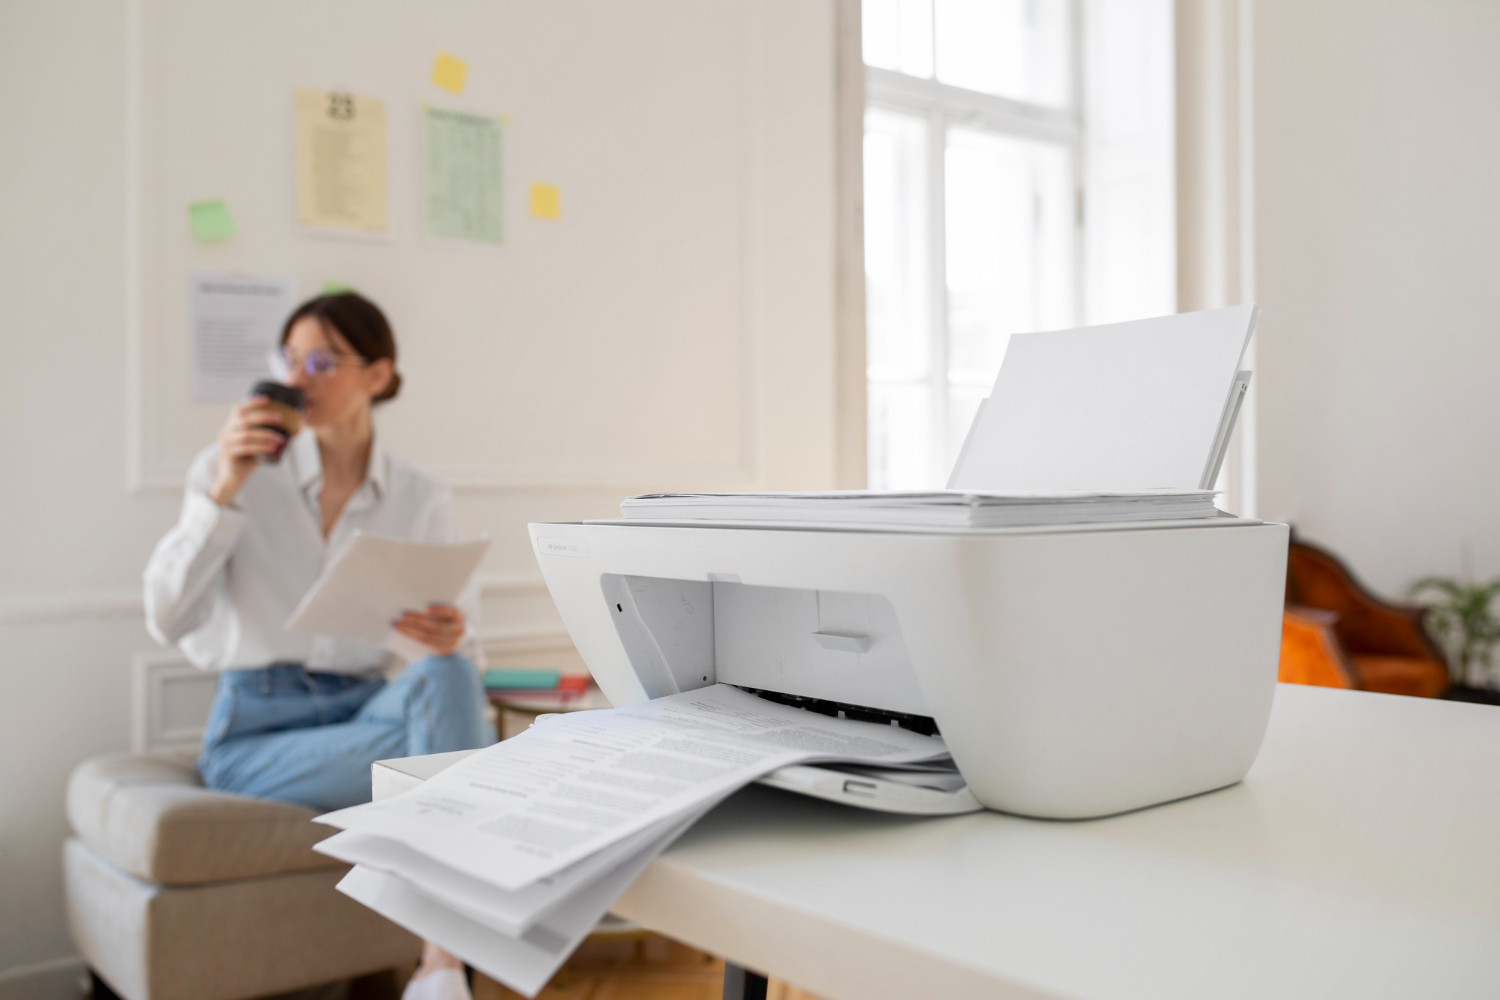 An Insider's Guide to Mitcham Photocopy Shop, London